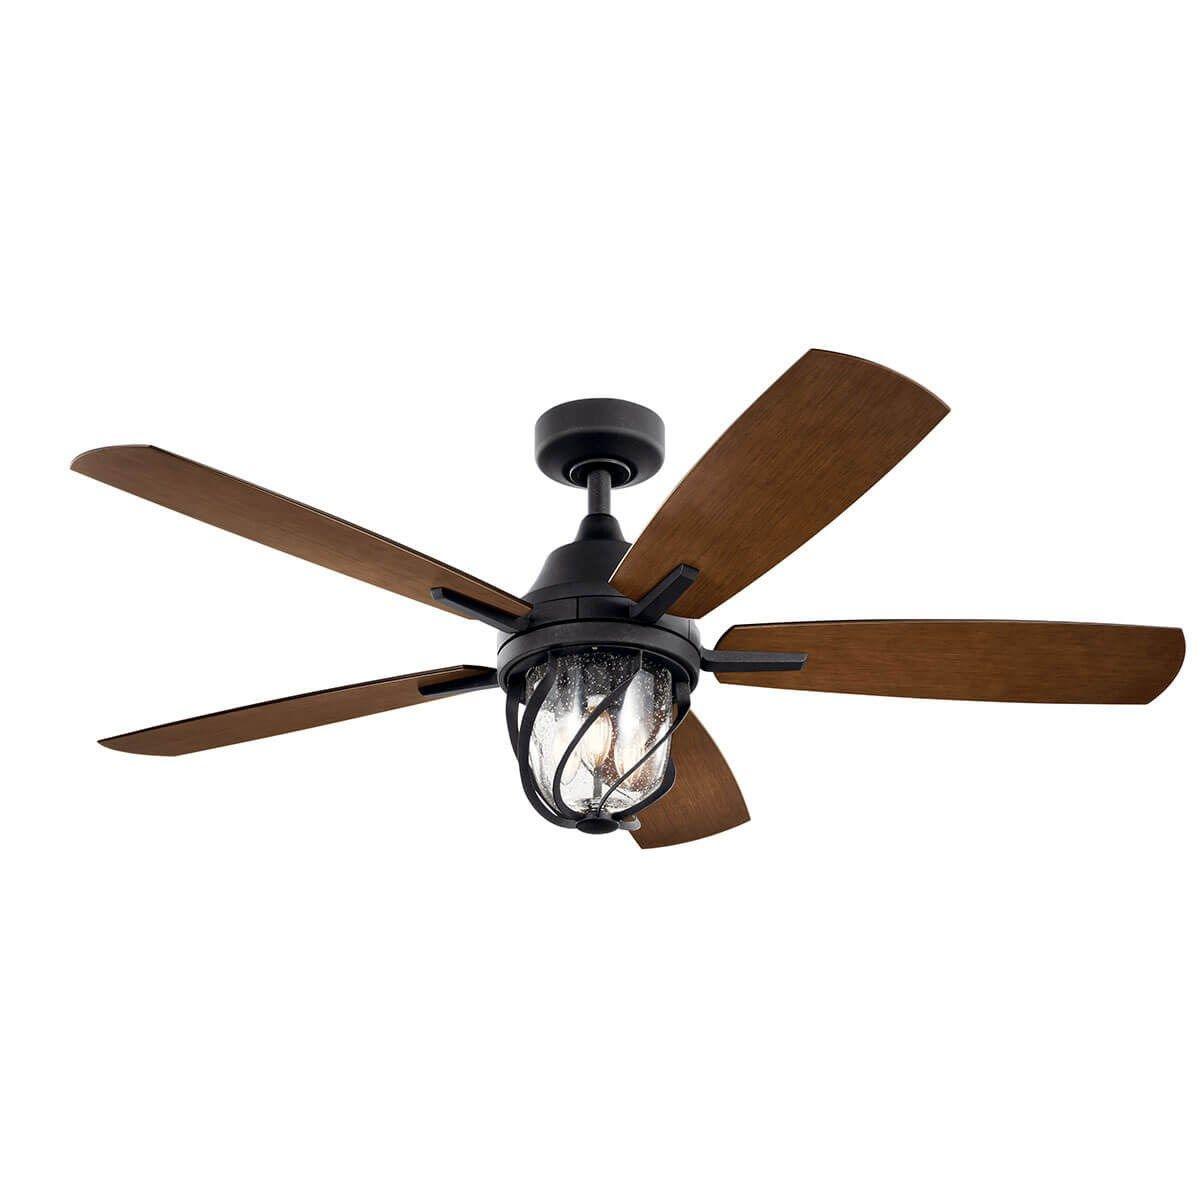 Lydra 52 Inch Rustic Caged Indoor/Outdoor Ceiling Fan With Light And Remote